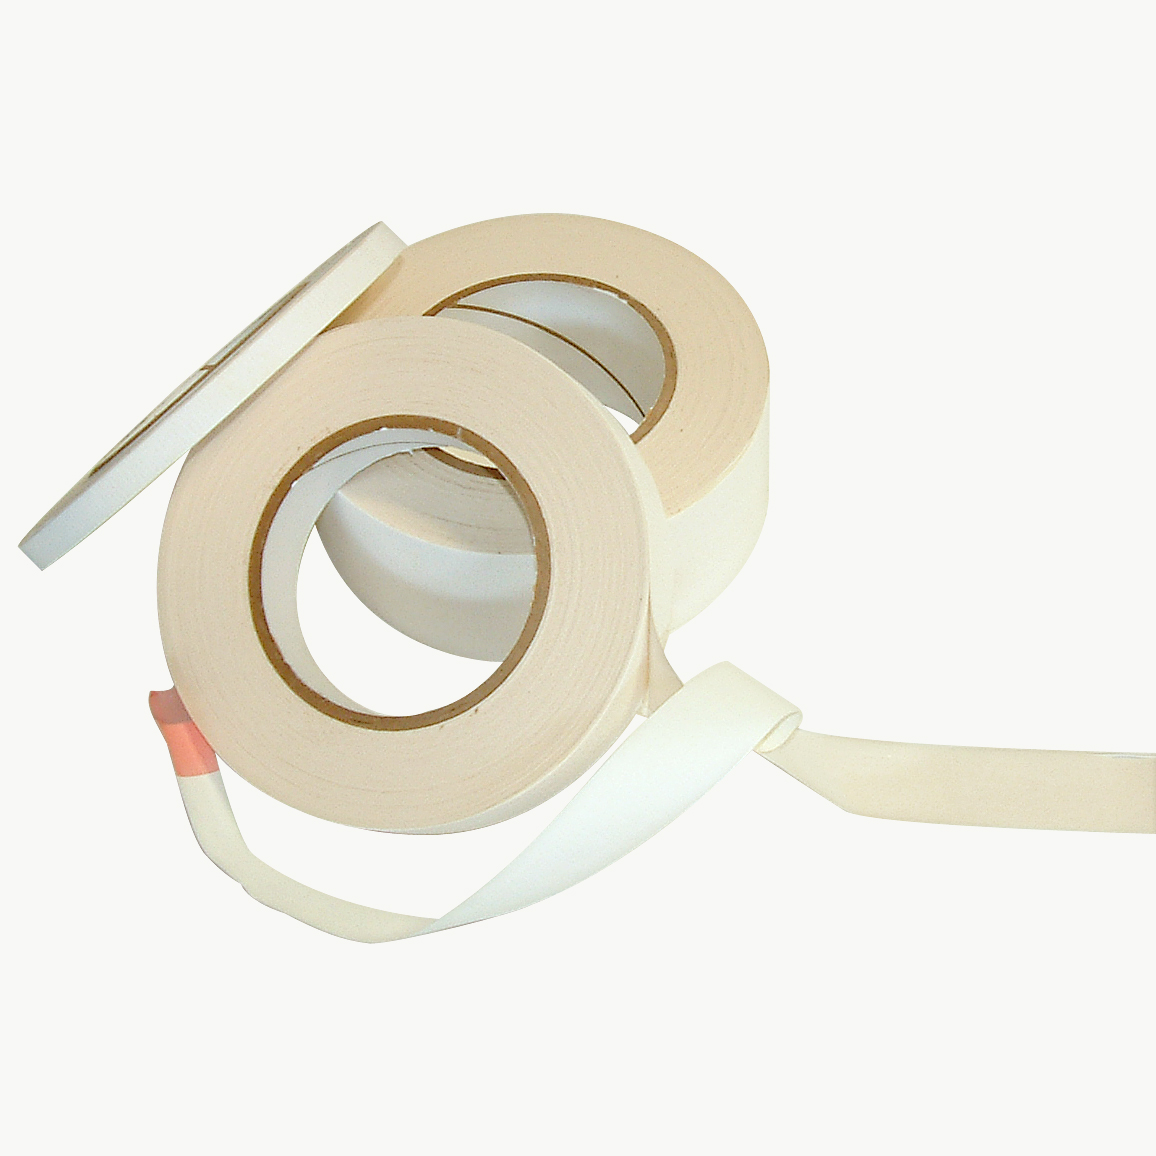 White x 36 yds. P-02 Double Coated Kraft Paper Tape: 3/4 in Permacel Nitto 